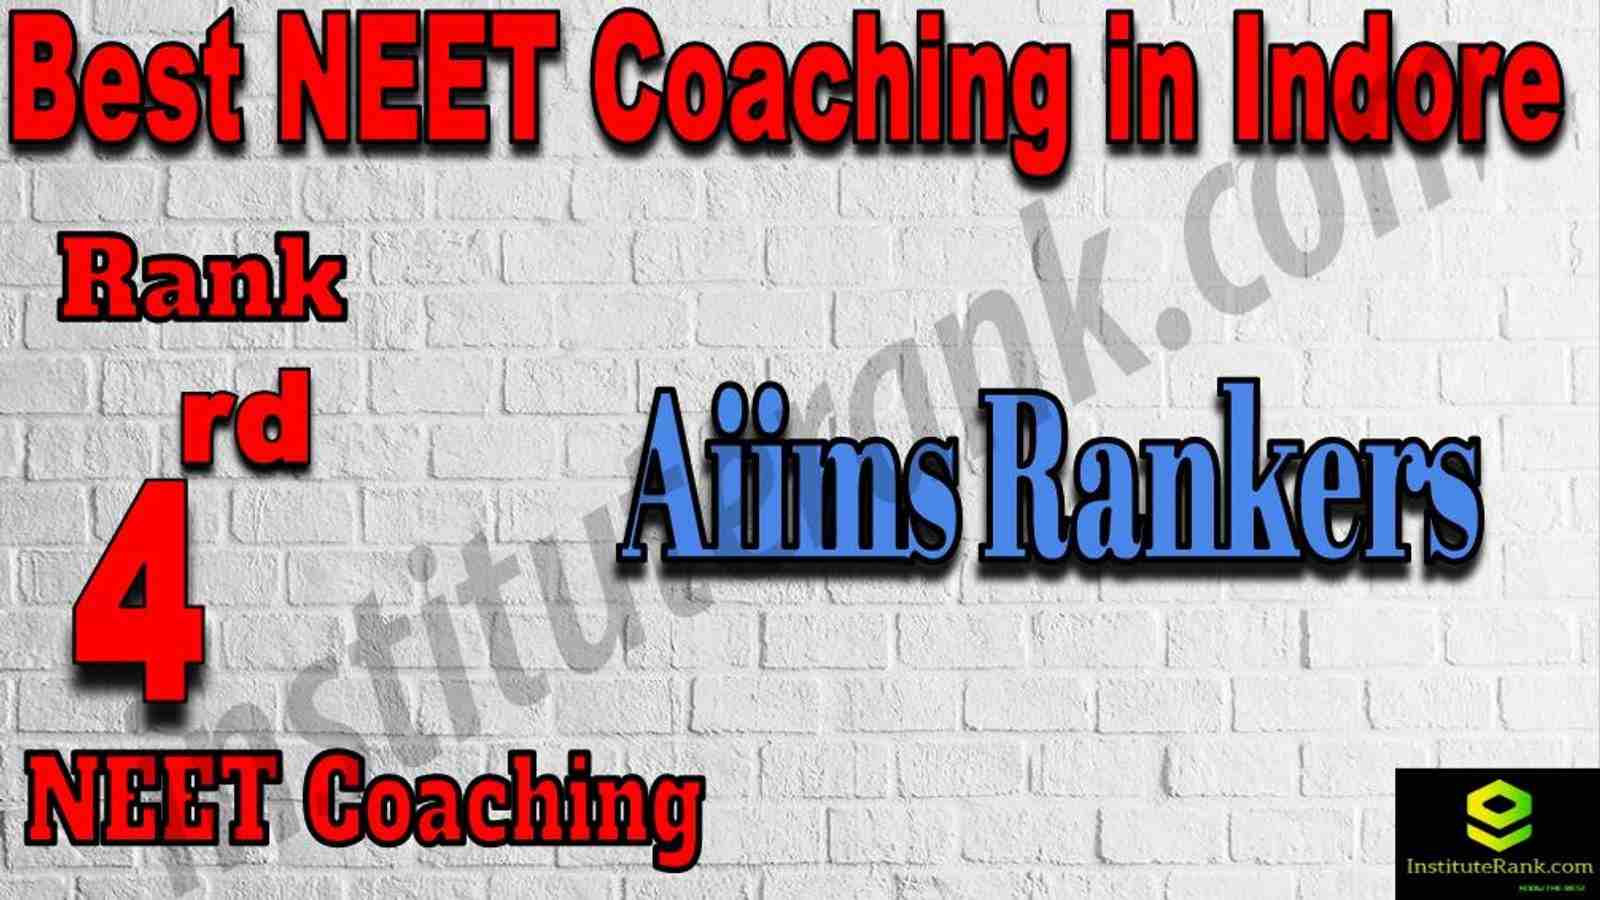 4th Best Neet Coaching in Indore